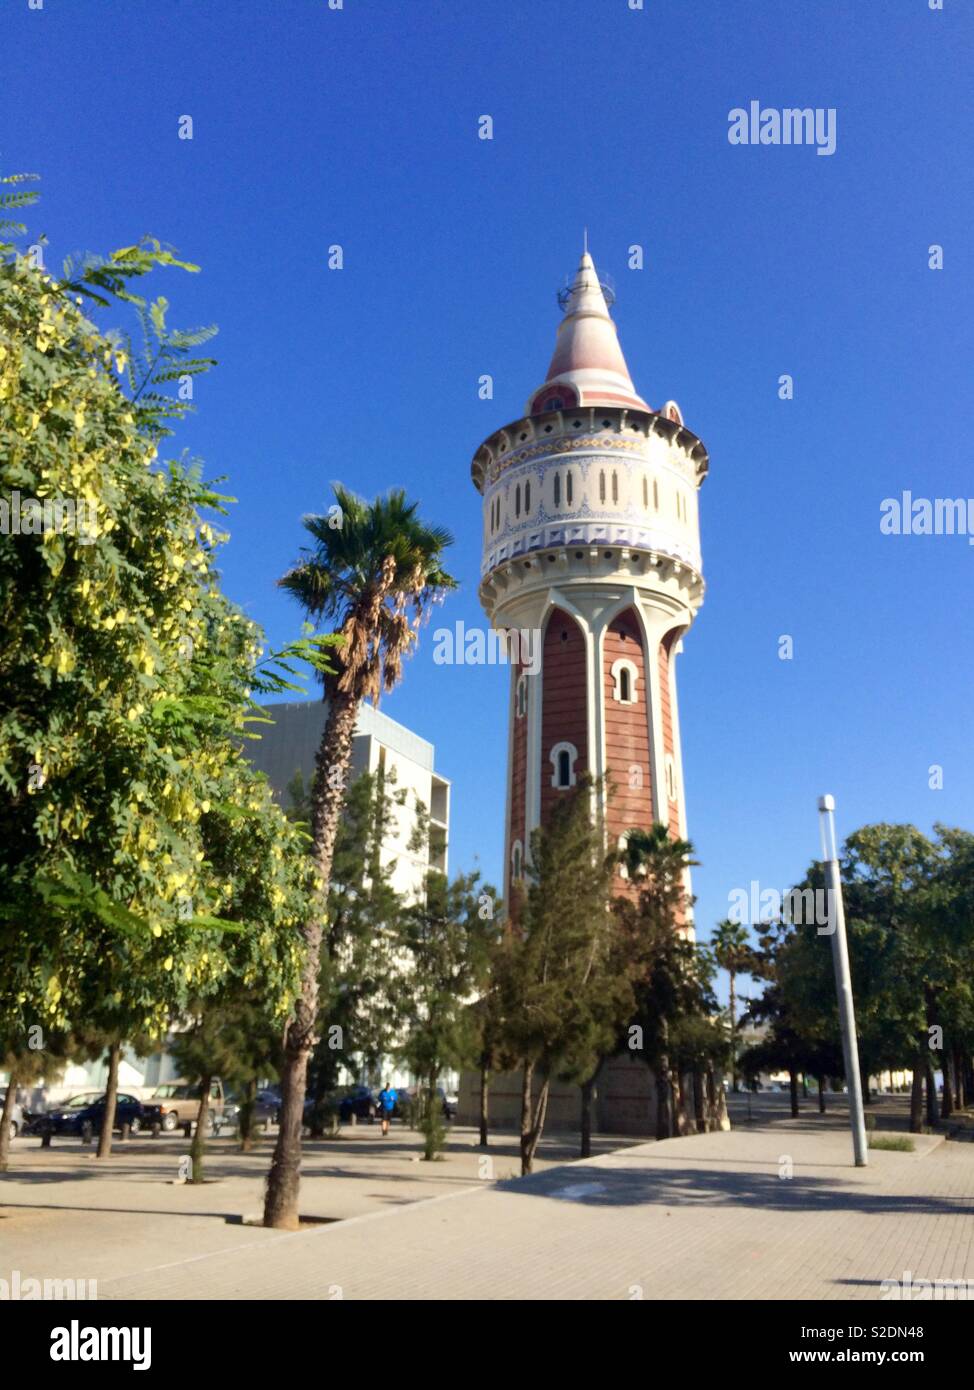 Old water tower in Barceloneta Park in Barcelona Spain on a sunny Autumn day Stock Photo